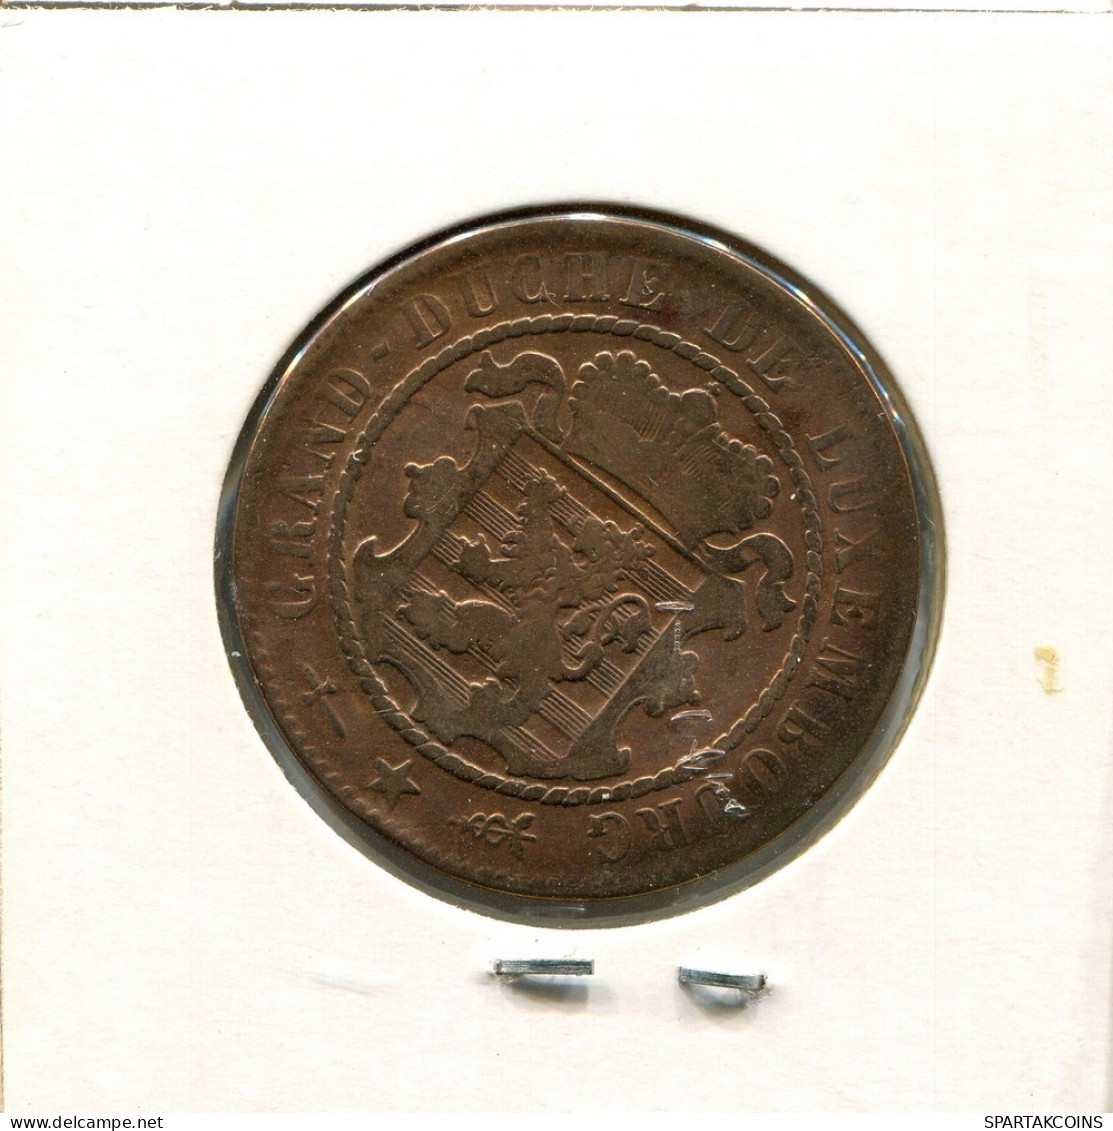 10 CENTIMES 1870 LUXEMBURG LUXEMBOURG Münze #AT180.D.A - Luxembourg